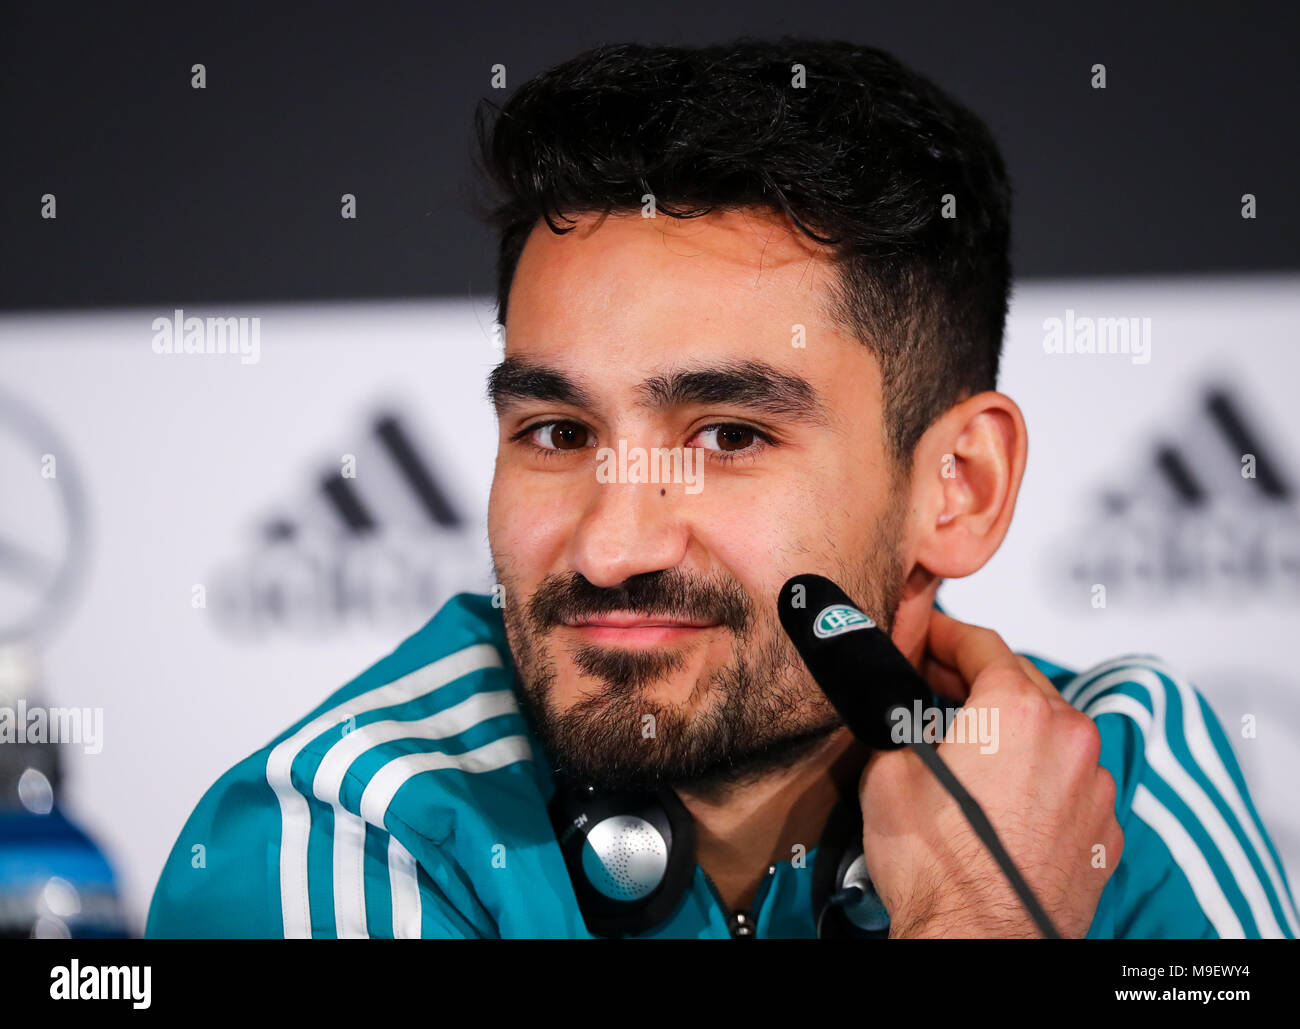 25 March 2018, Germany, Berlin: The German national team gives a press conference shortly before their game against Brazil. Player Ilkay Gündogan appears on stage. Photo: Christian Charisius/dpa Stock Photo